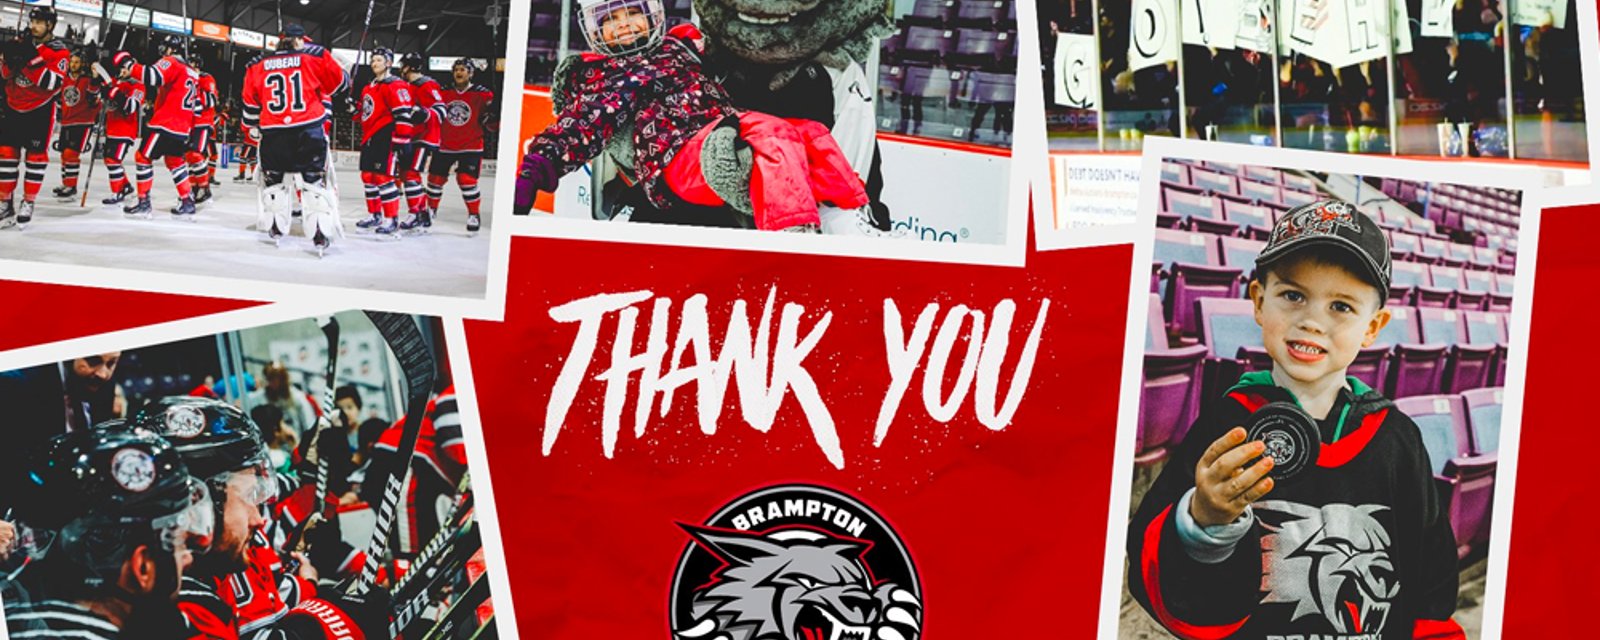 COVID-19 claims its first pro hockey official victim, ECHL's Brampton Beast cease operations permanently 